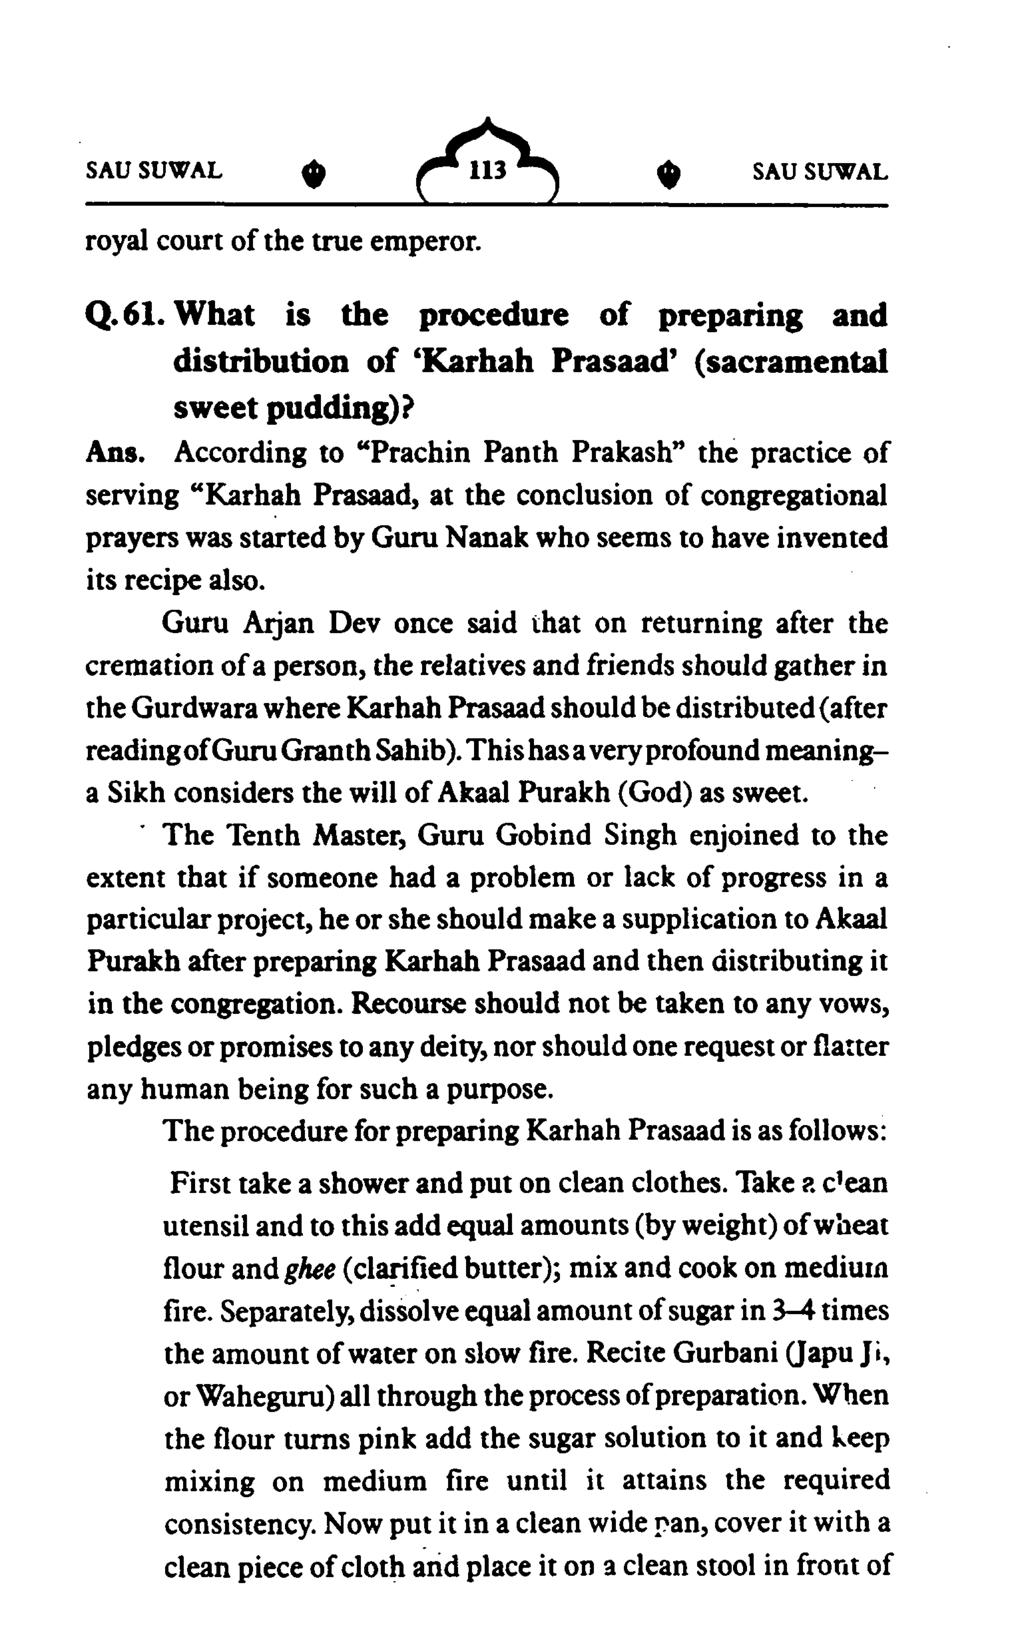 SAUSUWAL A royal court ofthe true emperor. Q.61. What is the procedure of preparing and distribution of 'Karhah Prasaad' (sacramental sweet pudding)? Ani.